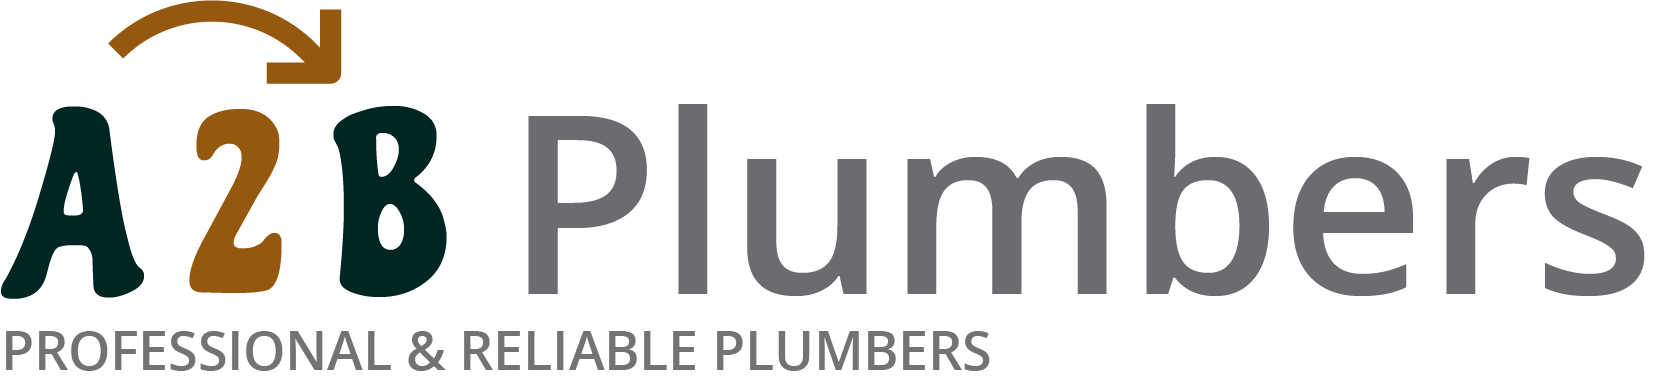 If you need a boiler installed, a radiator repaired or a leaking tap fixed, call us now - we provide services for properties in Dartmouth Park and the local area.